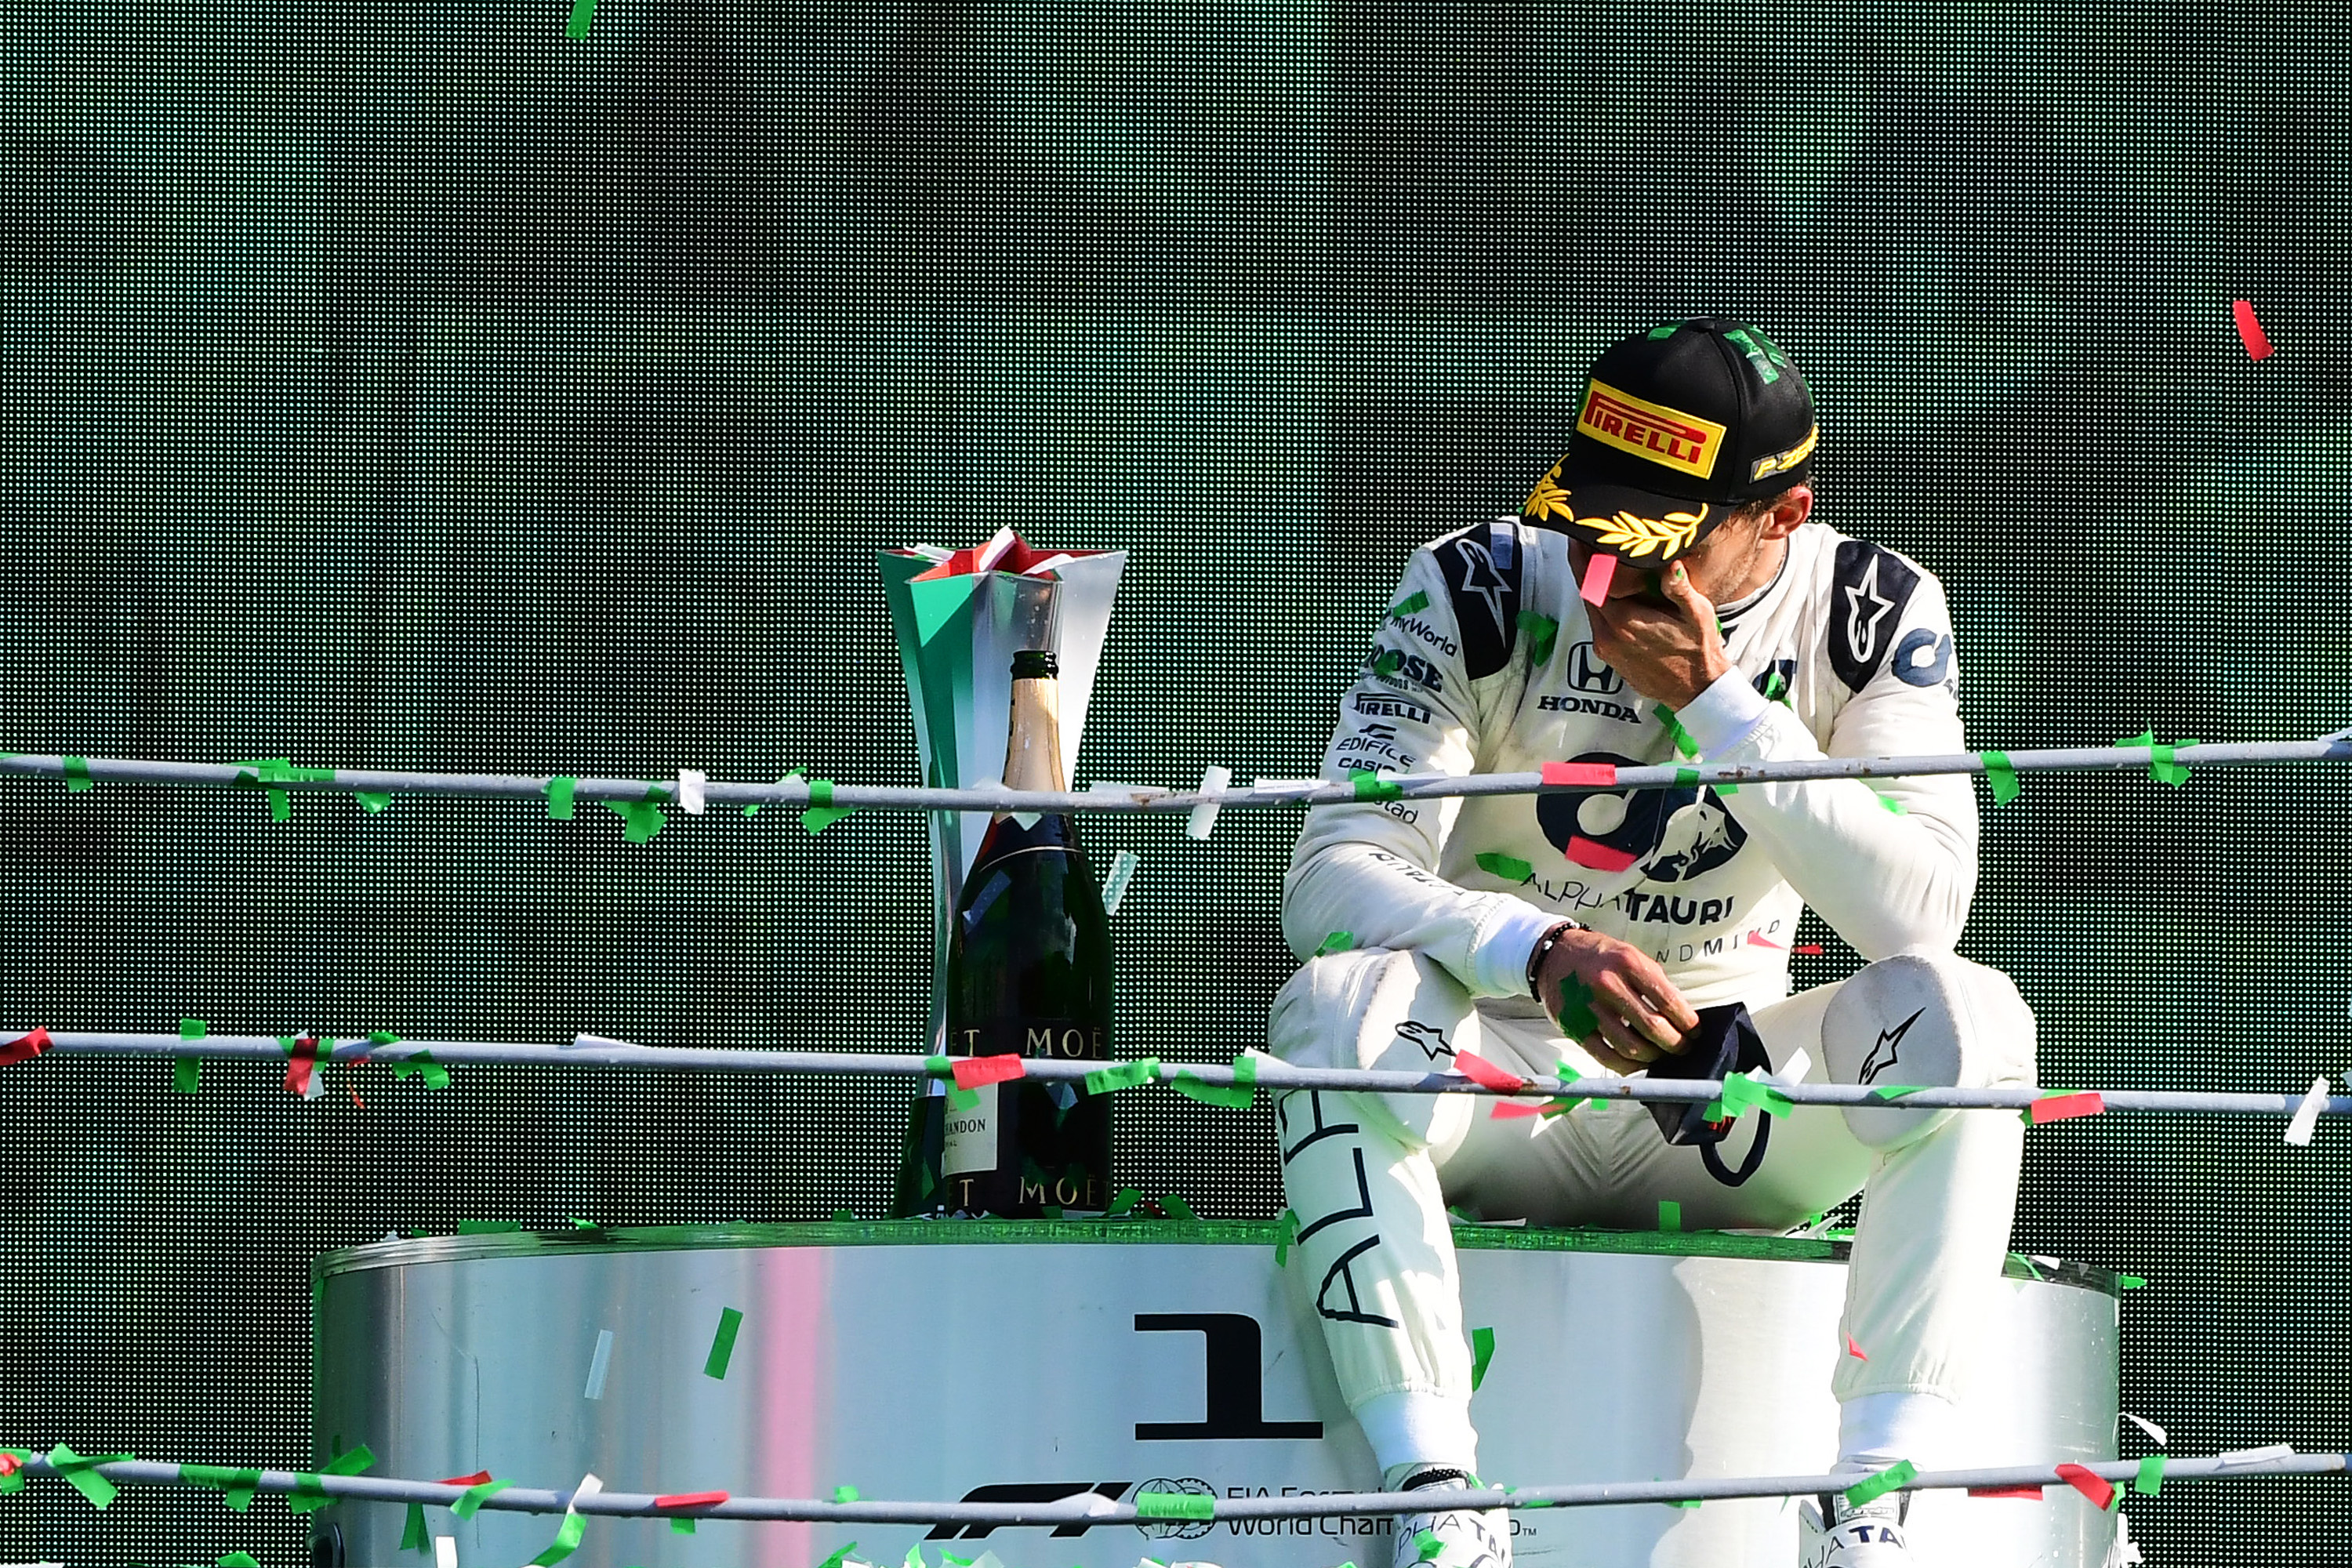 Race car driver Pierre Gasly sits on the winner’s dais beside a bottle of champagne after the F1 Grand Prix.